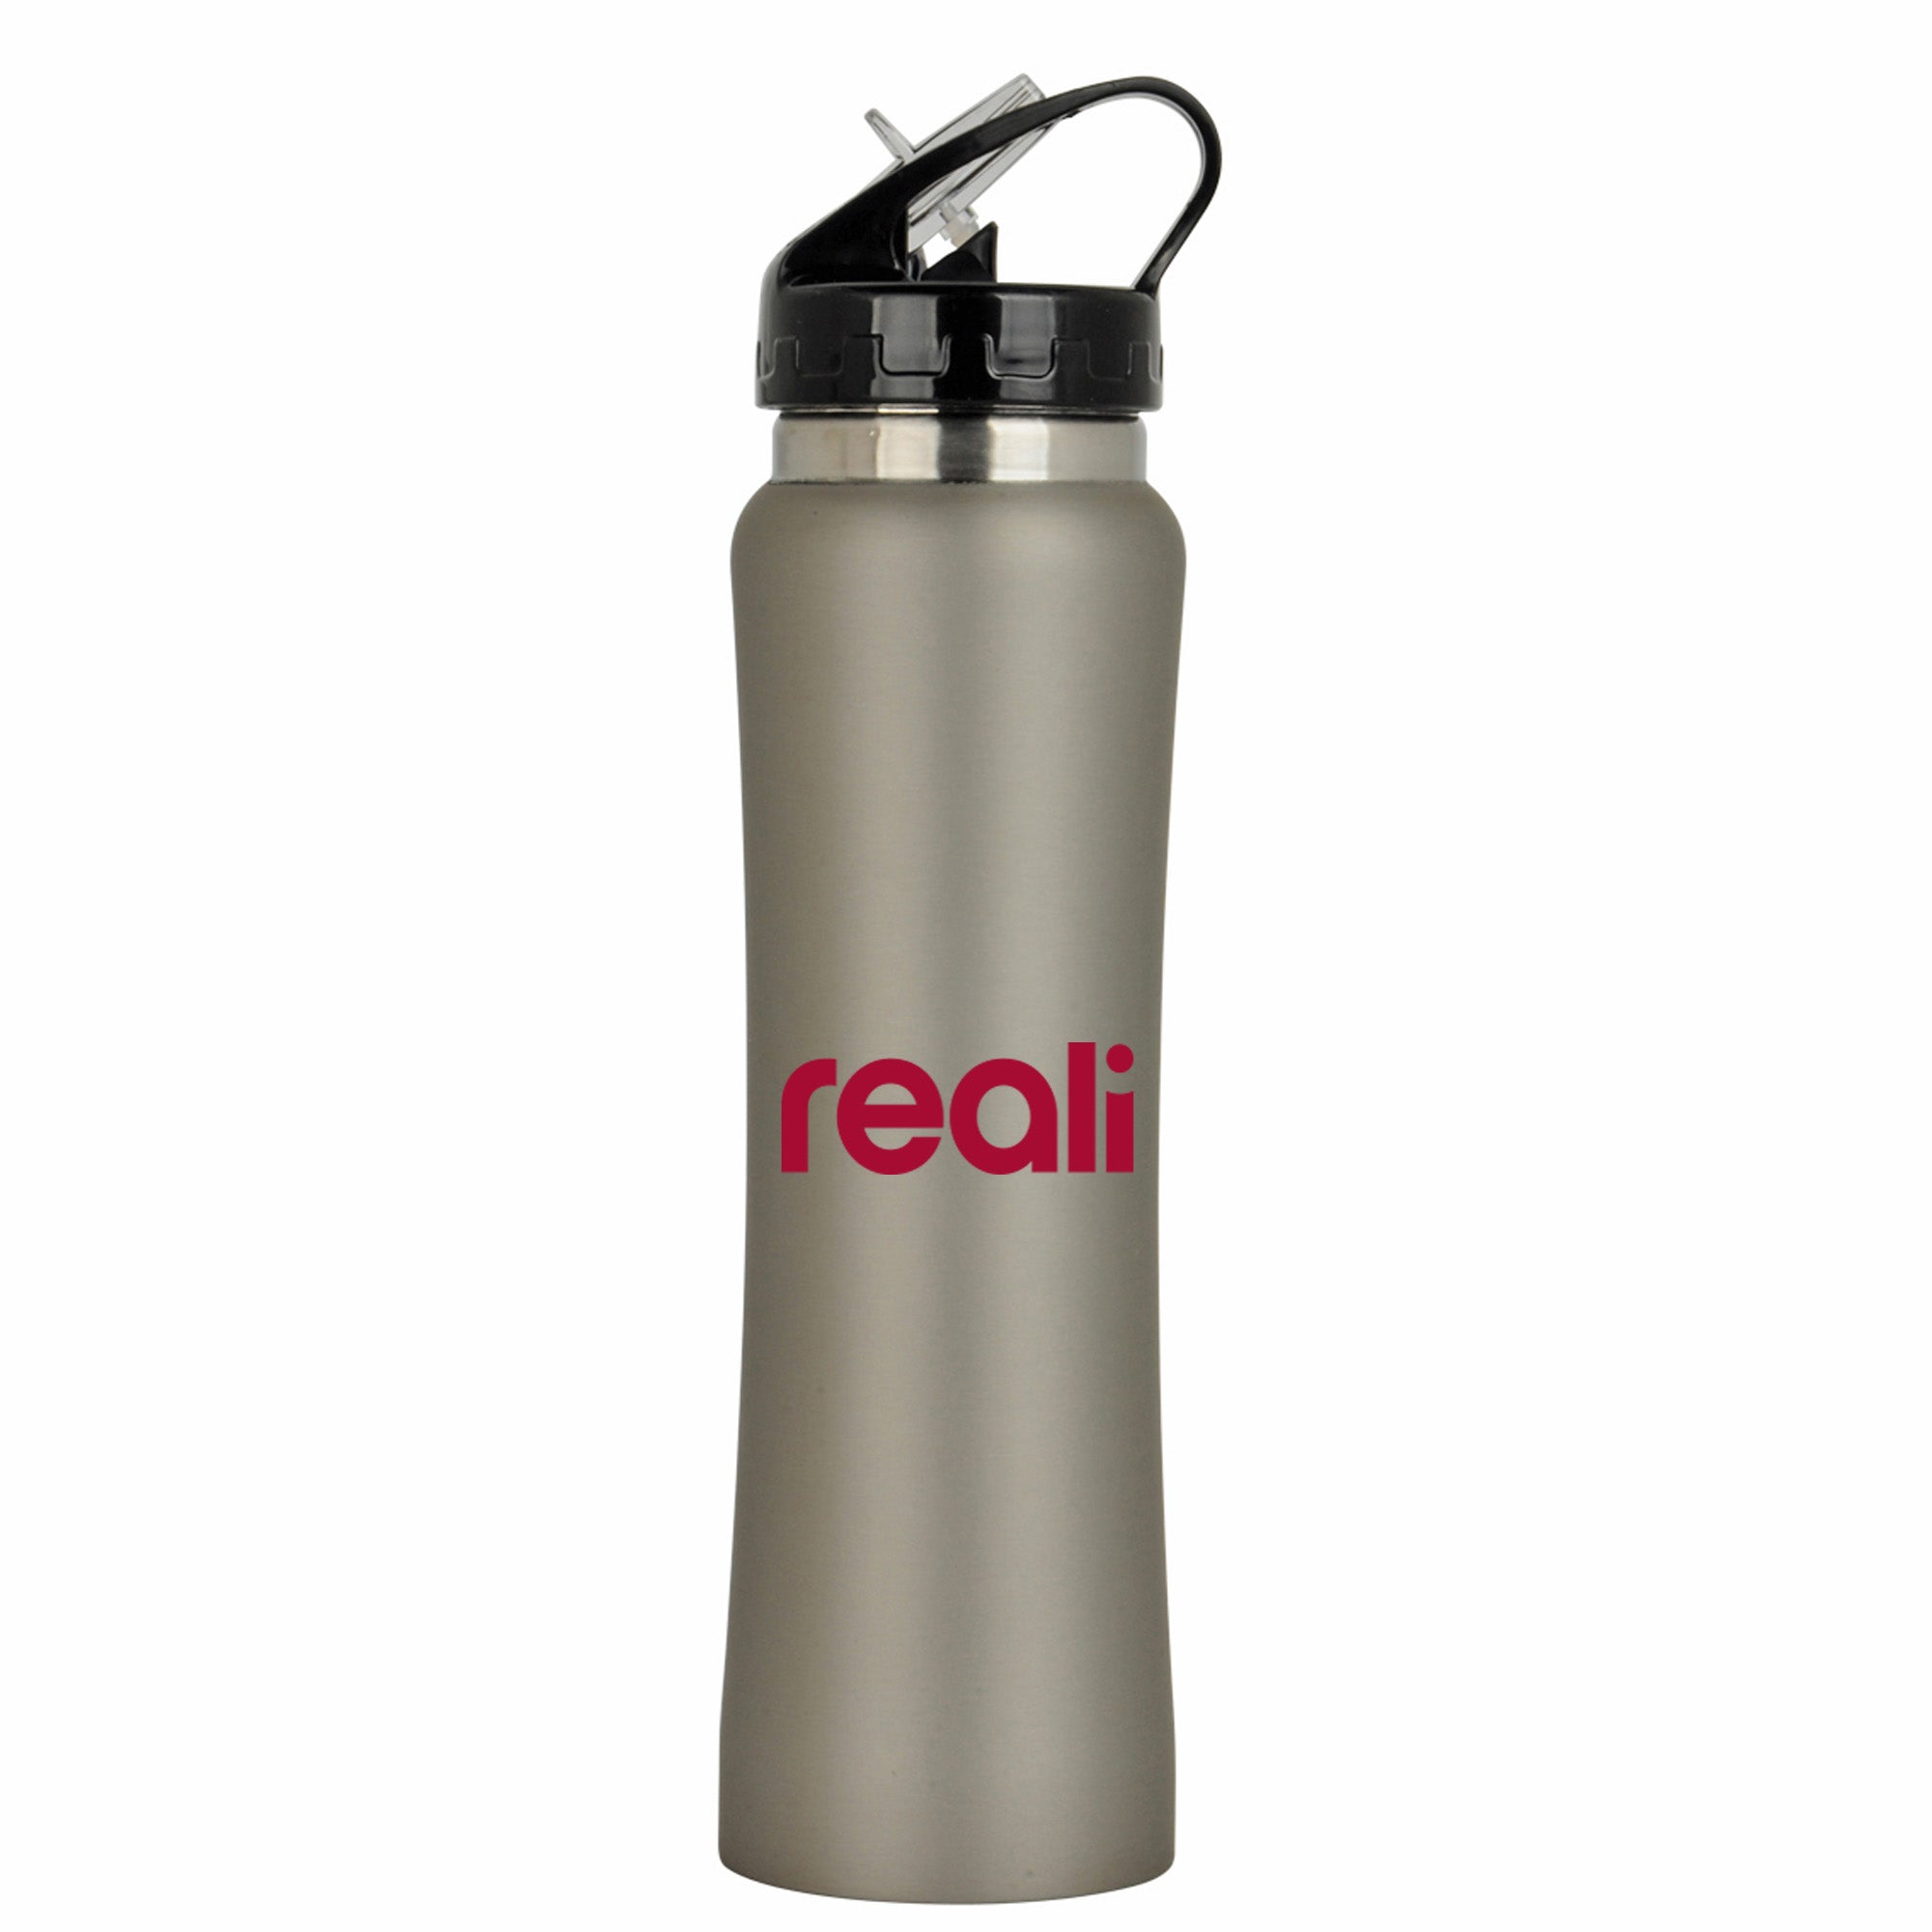 Soft-Touch Stainless Steel Custom Water Bottle - 25 oz.